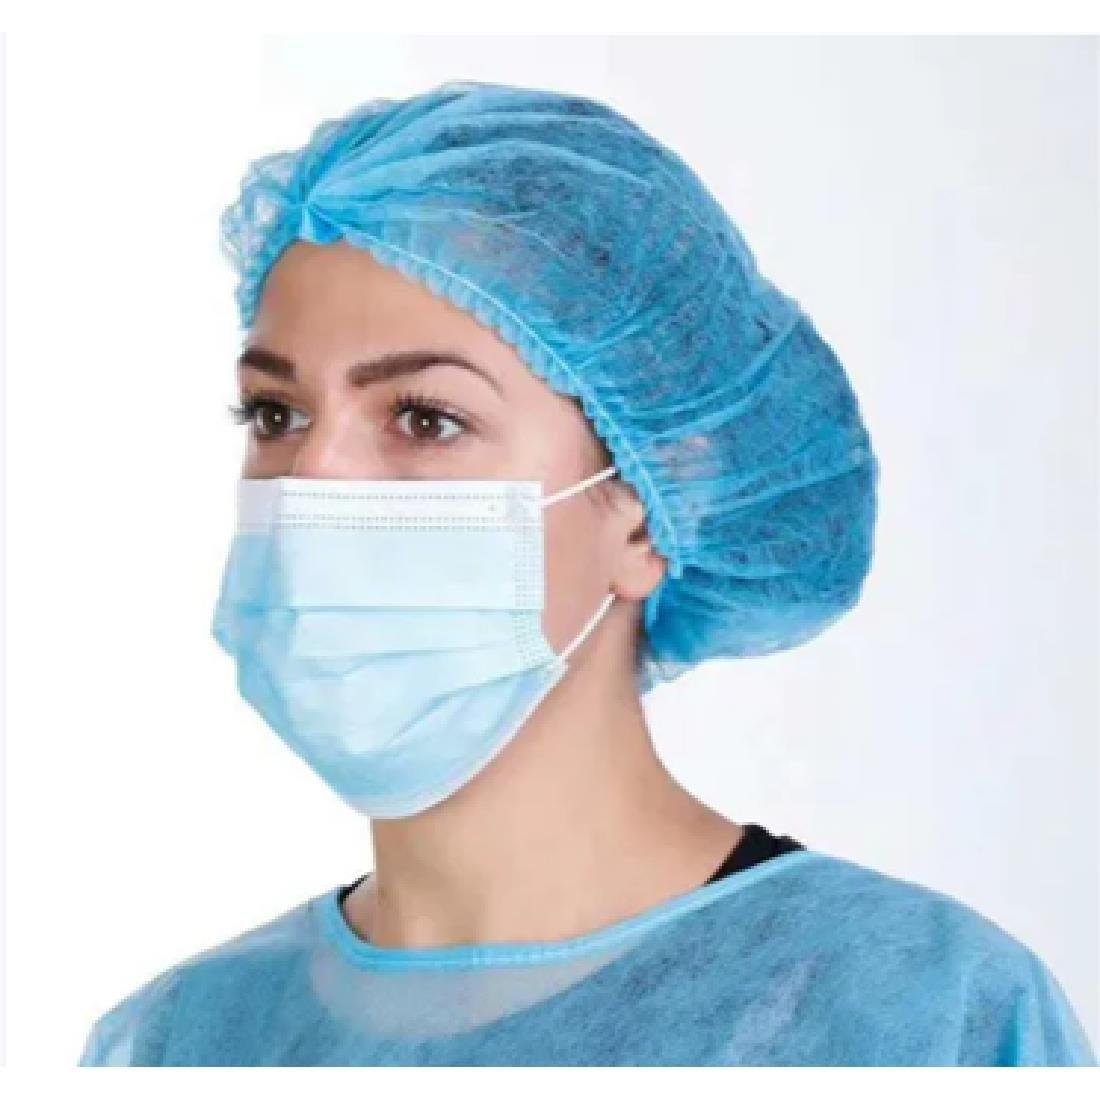 Obrush Surgical Face Masks Type IIR ASTM Level 2 | Type 2R - Pack of 50 - DE743 - 2